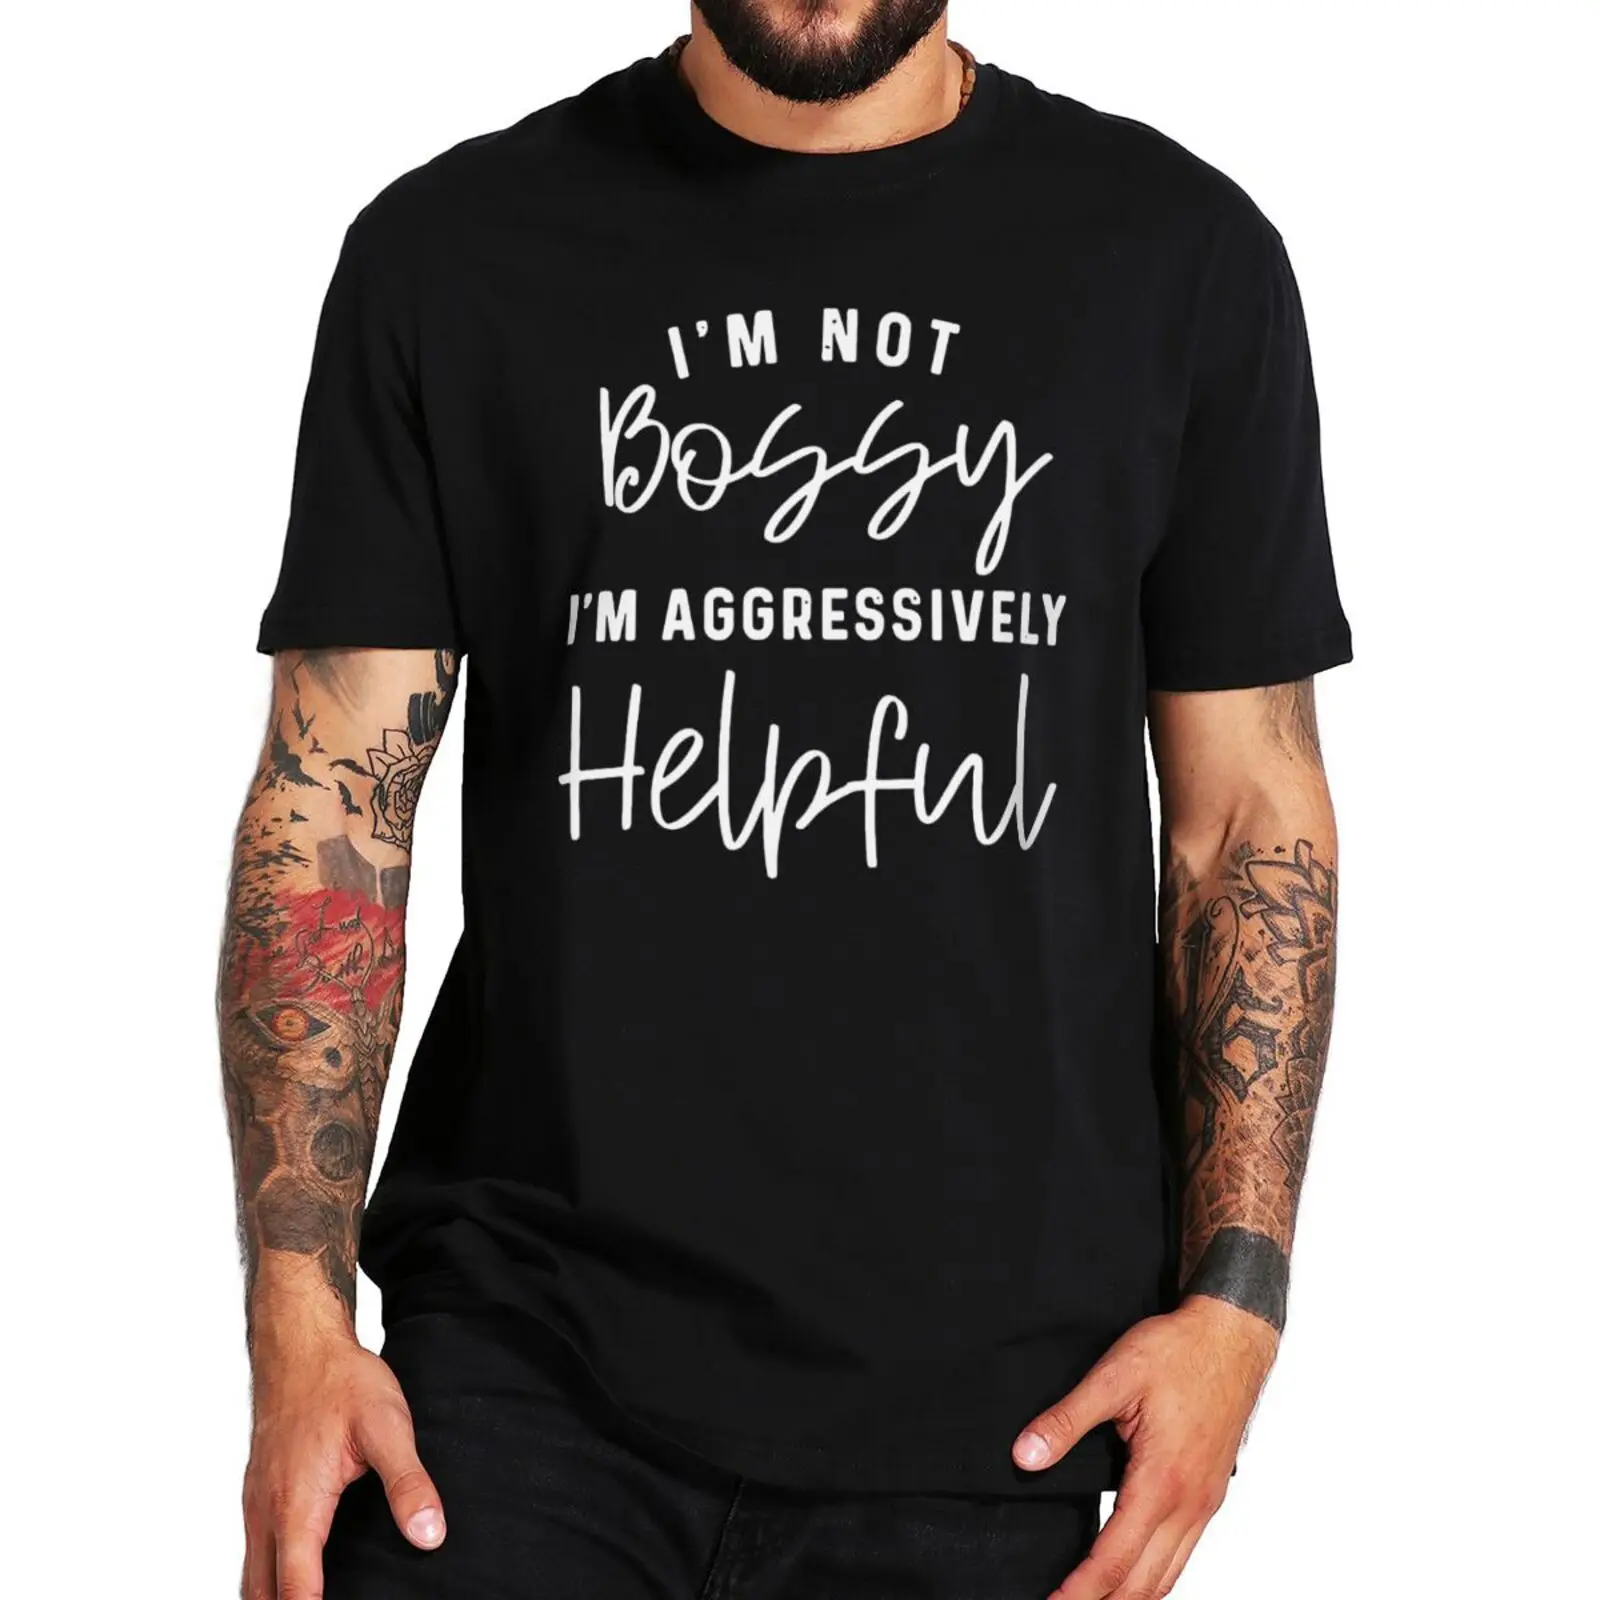 

I'm Not Bossy I'm Aggressively Helpful T Shirt Positive Funny Sarcastic Quote Gift Tee Tops Trending Men Women Classic Tshirt